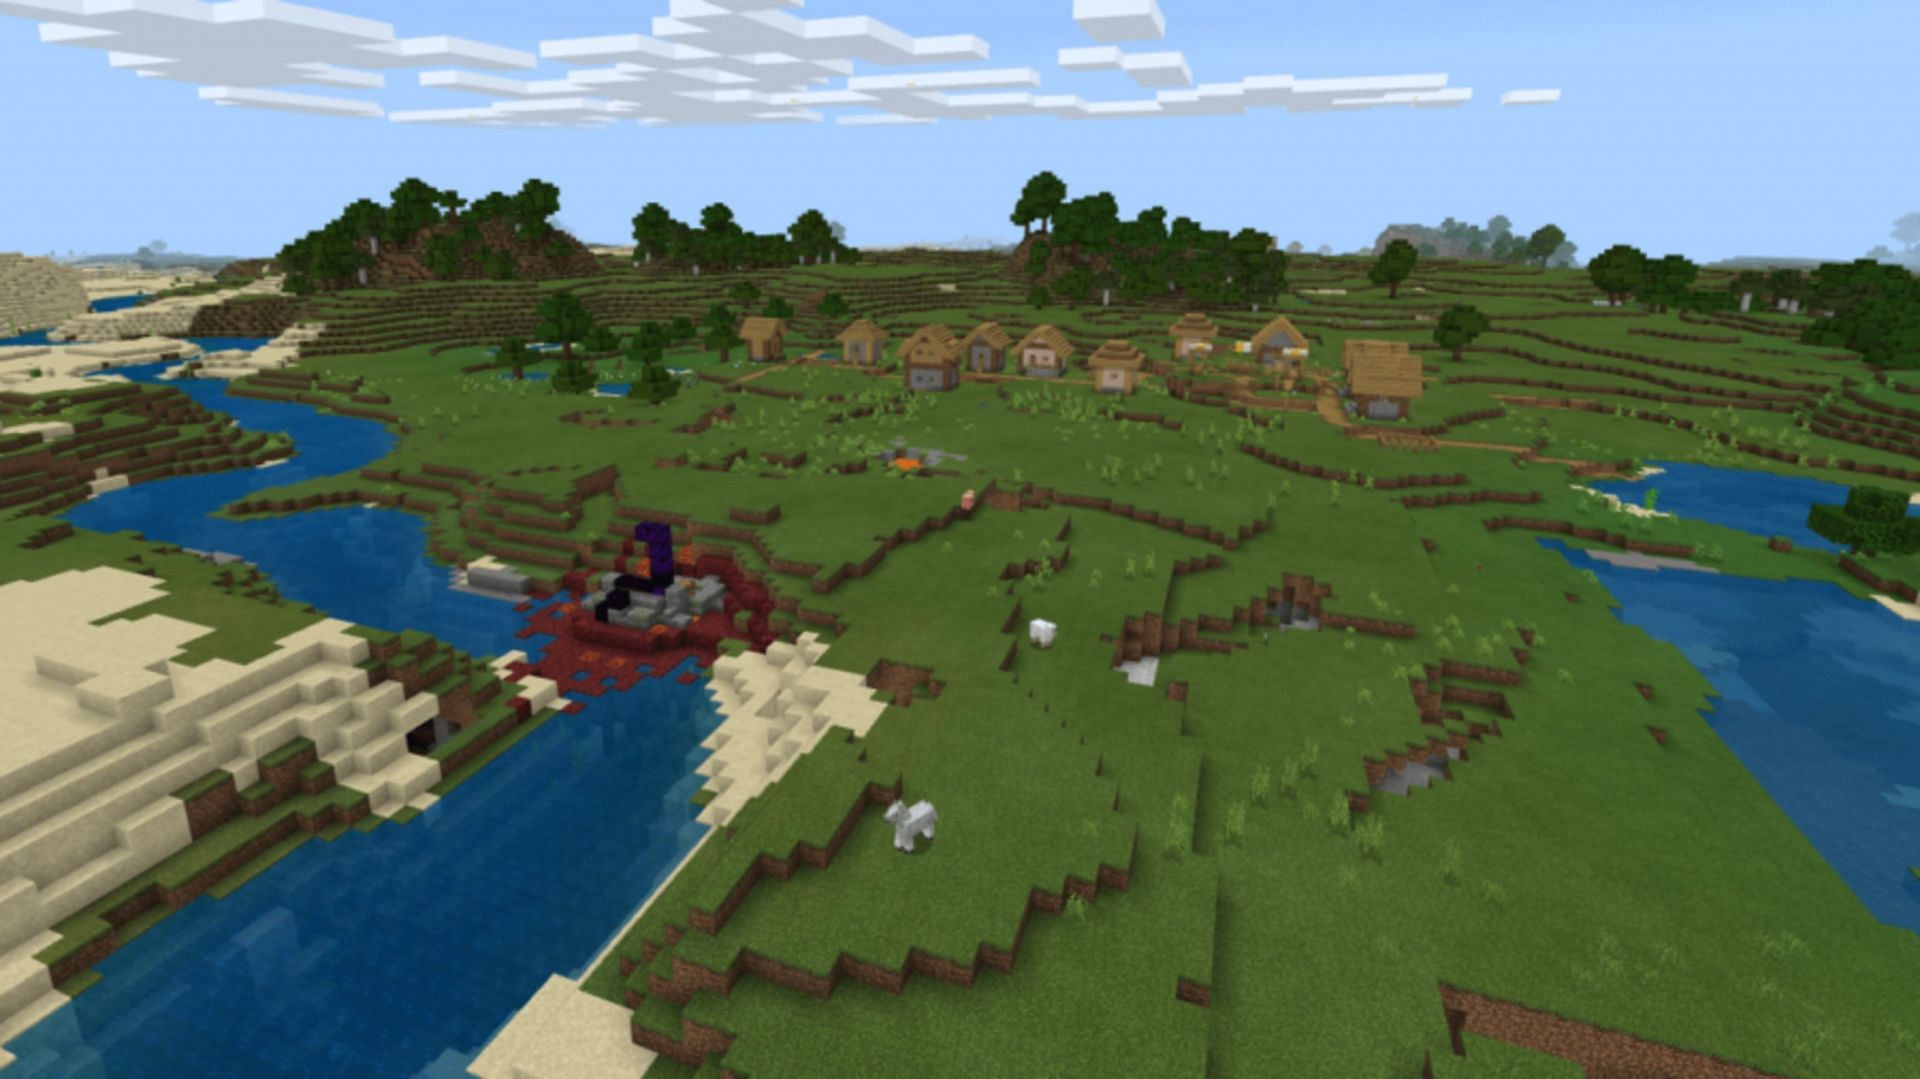 This seed&#039;s village can provide players with 18 diamonds right at spawn (Image via Mojang)